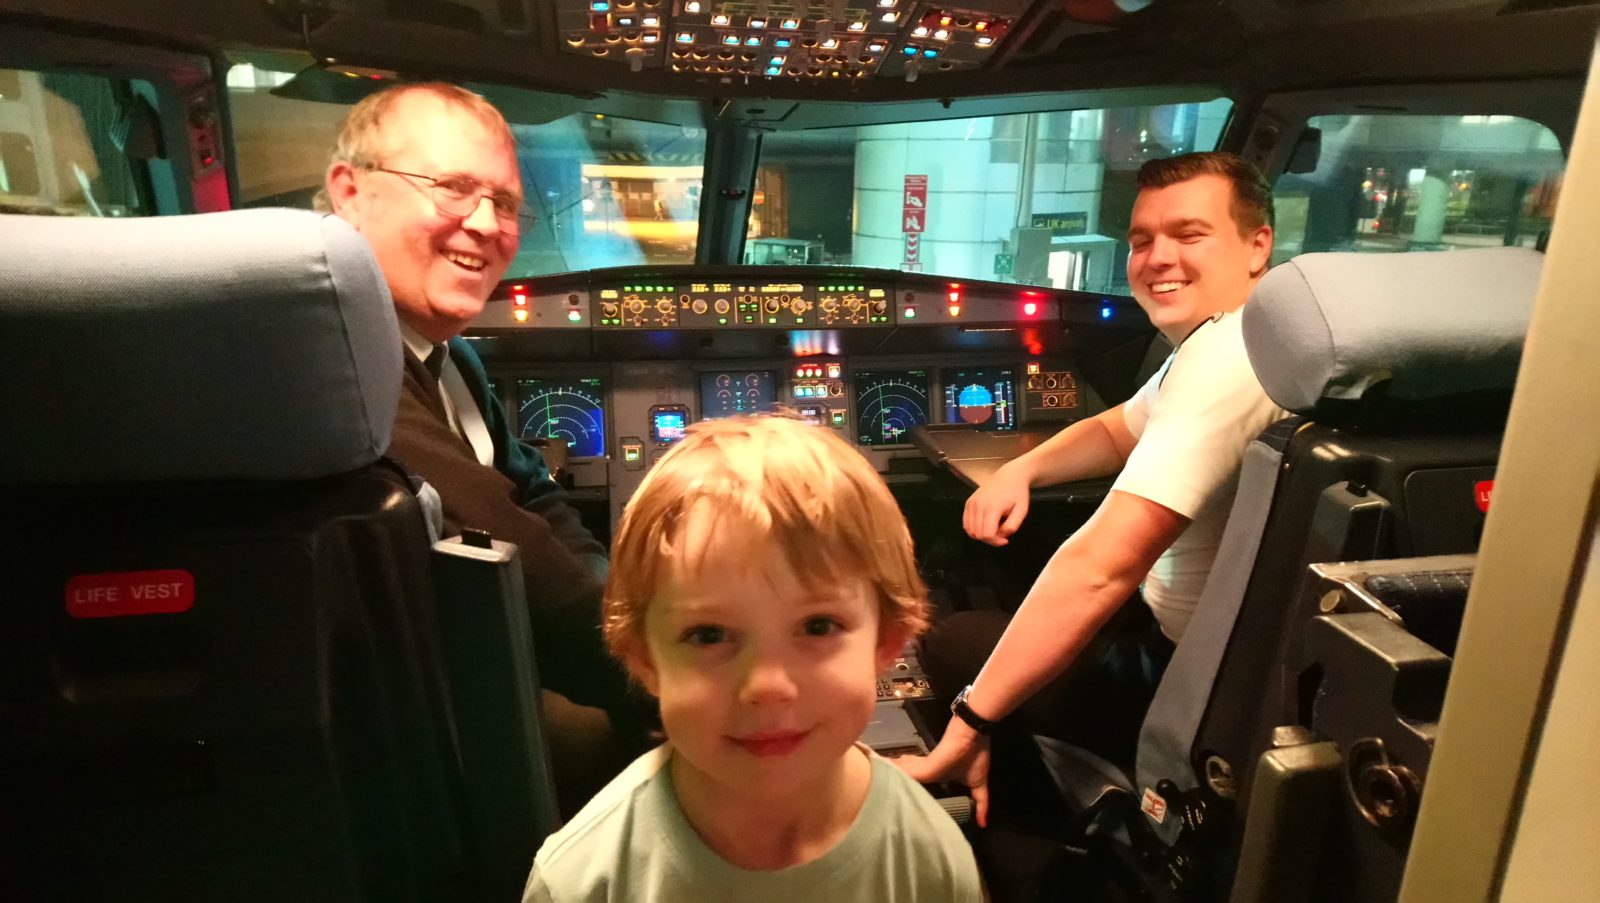 Meeting the pilots in the cockpit